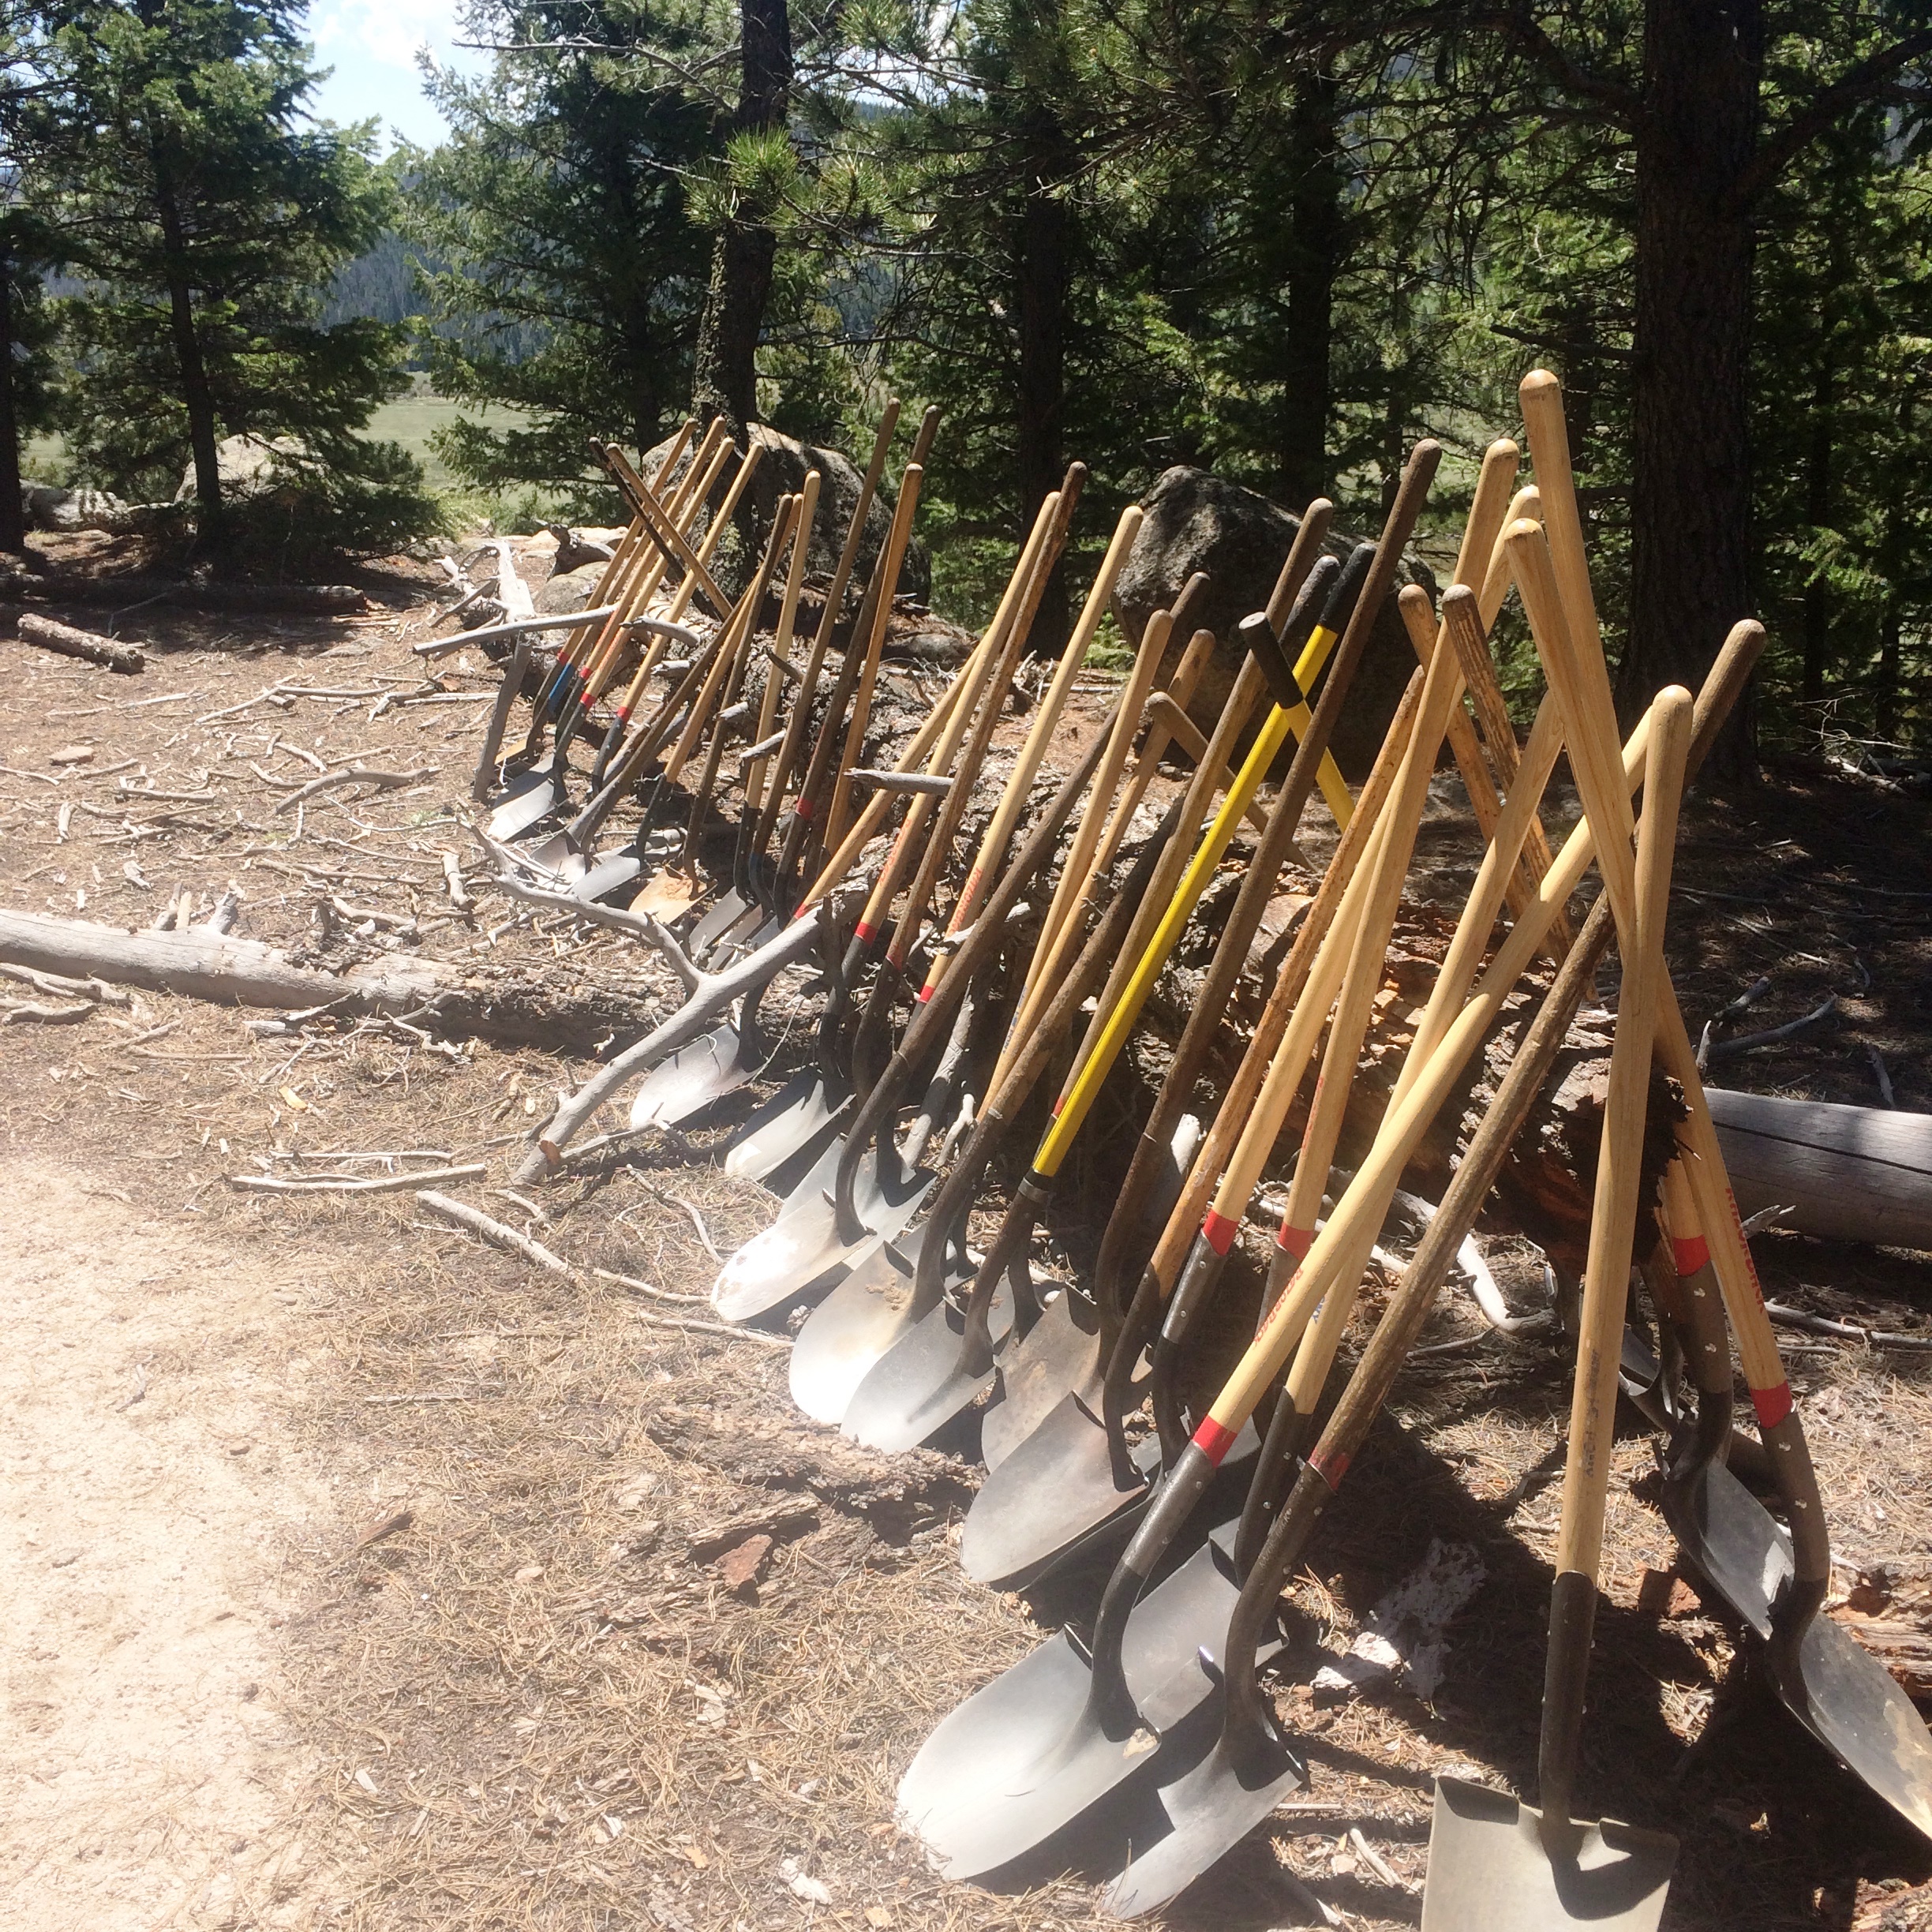 Lunchtime tool line during Trails 101 day. 